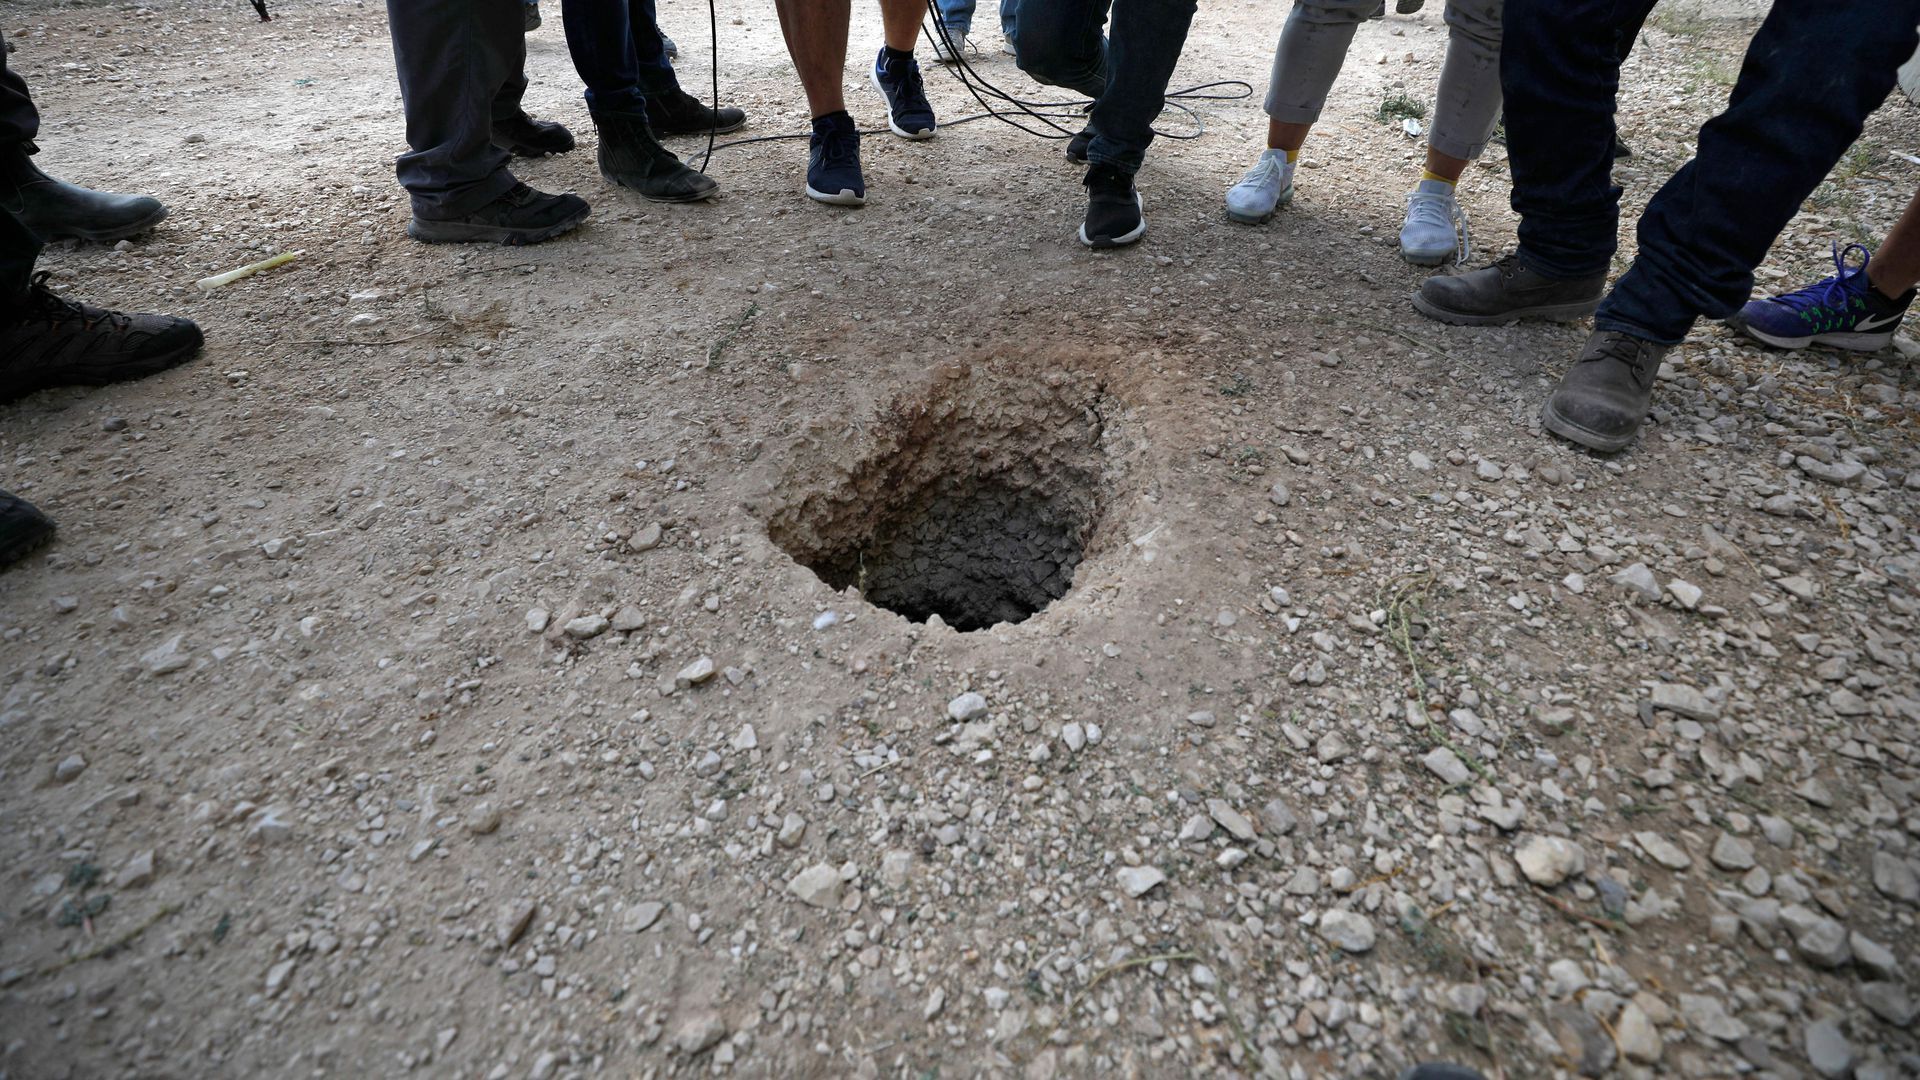 The hole the prisoners escaped from. 